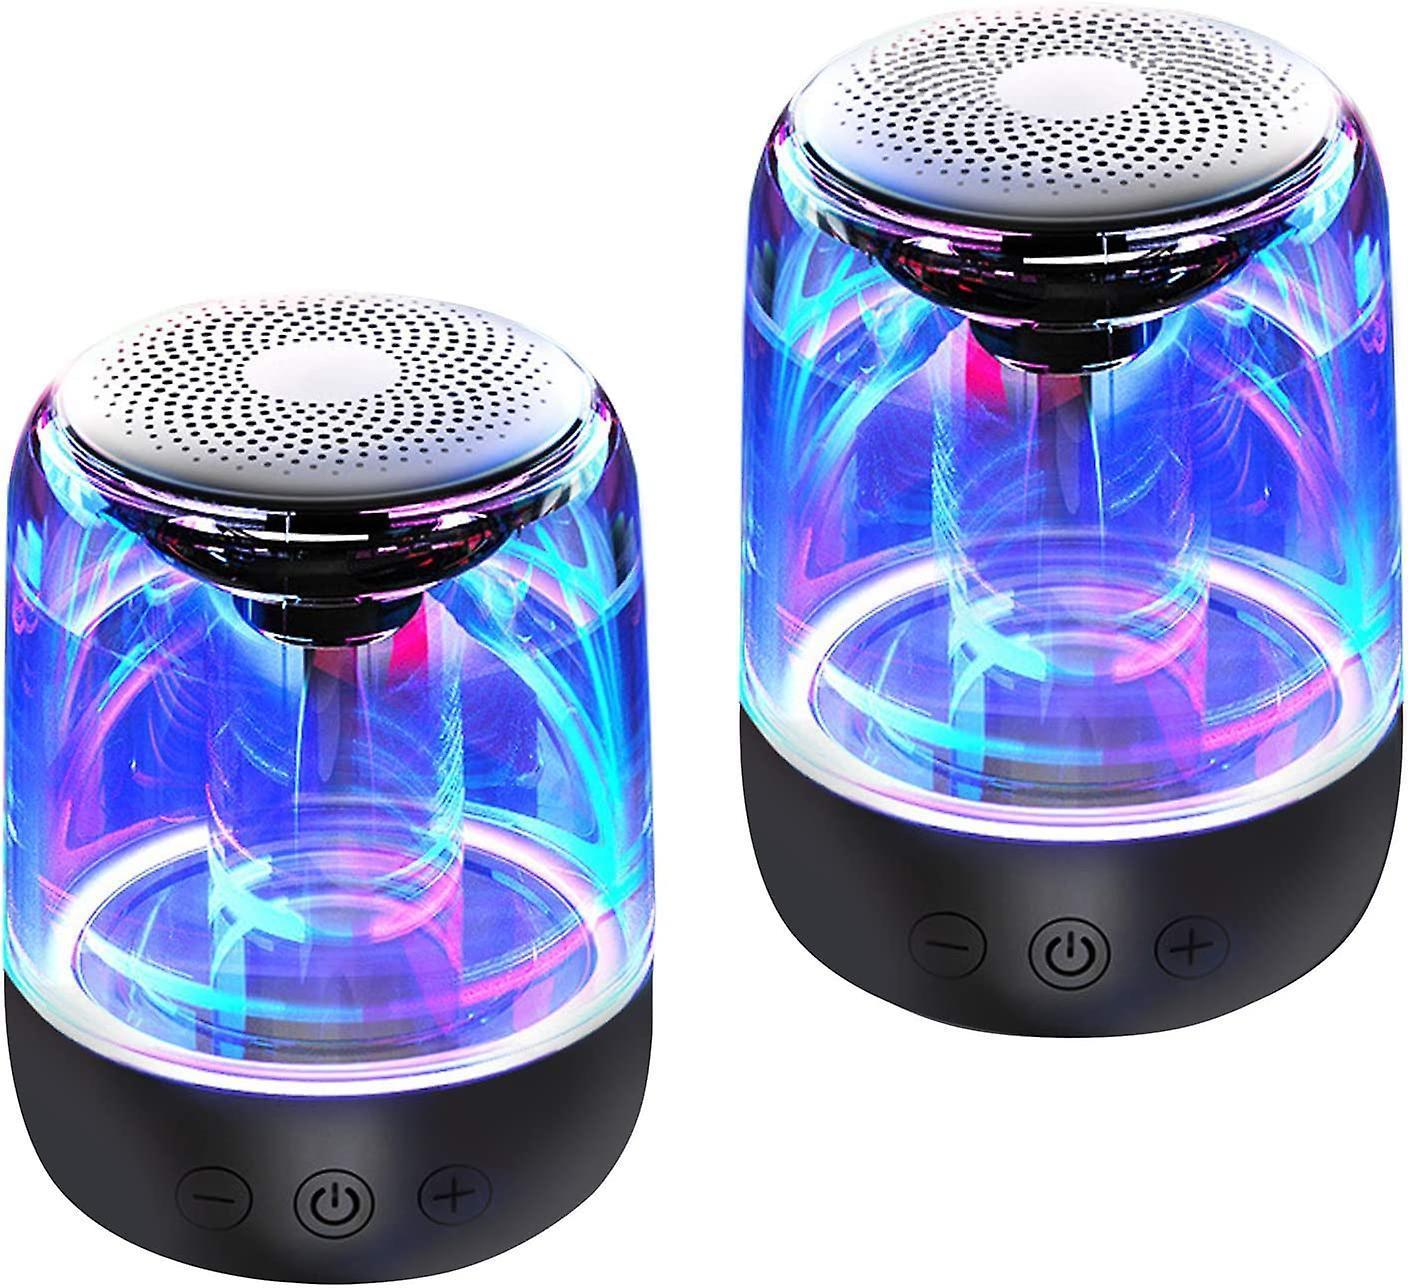 Portable Bluetooth Speakers, True Wireless Stereo Speakers For Phones/tablets/computers, Led Lights, Crystal Clear Sound Rich Bass, Hands-free, Tf C